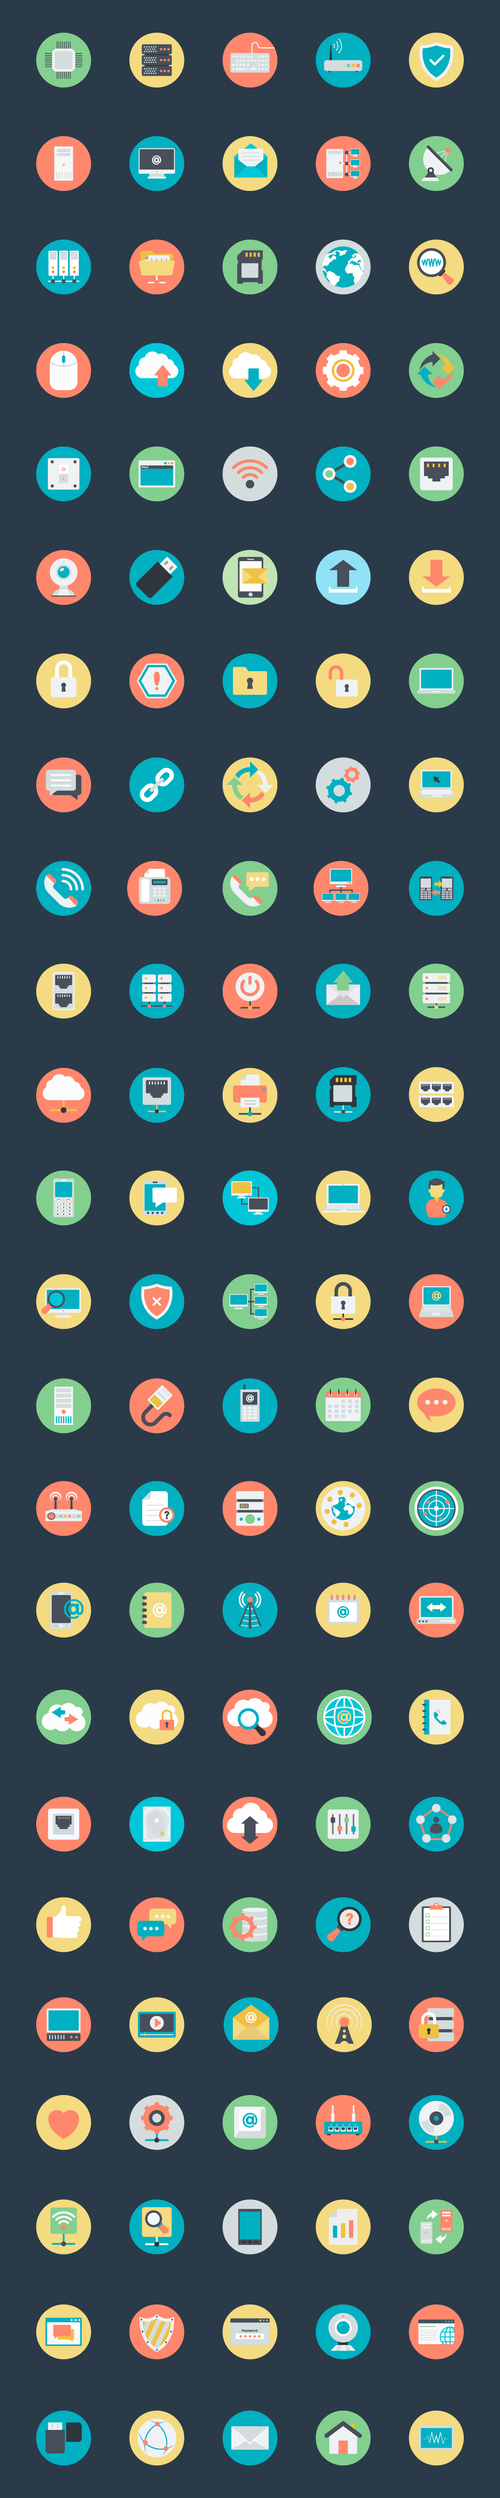 Networking icon vector